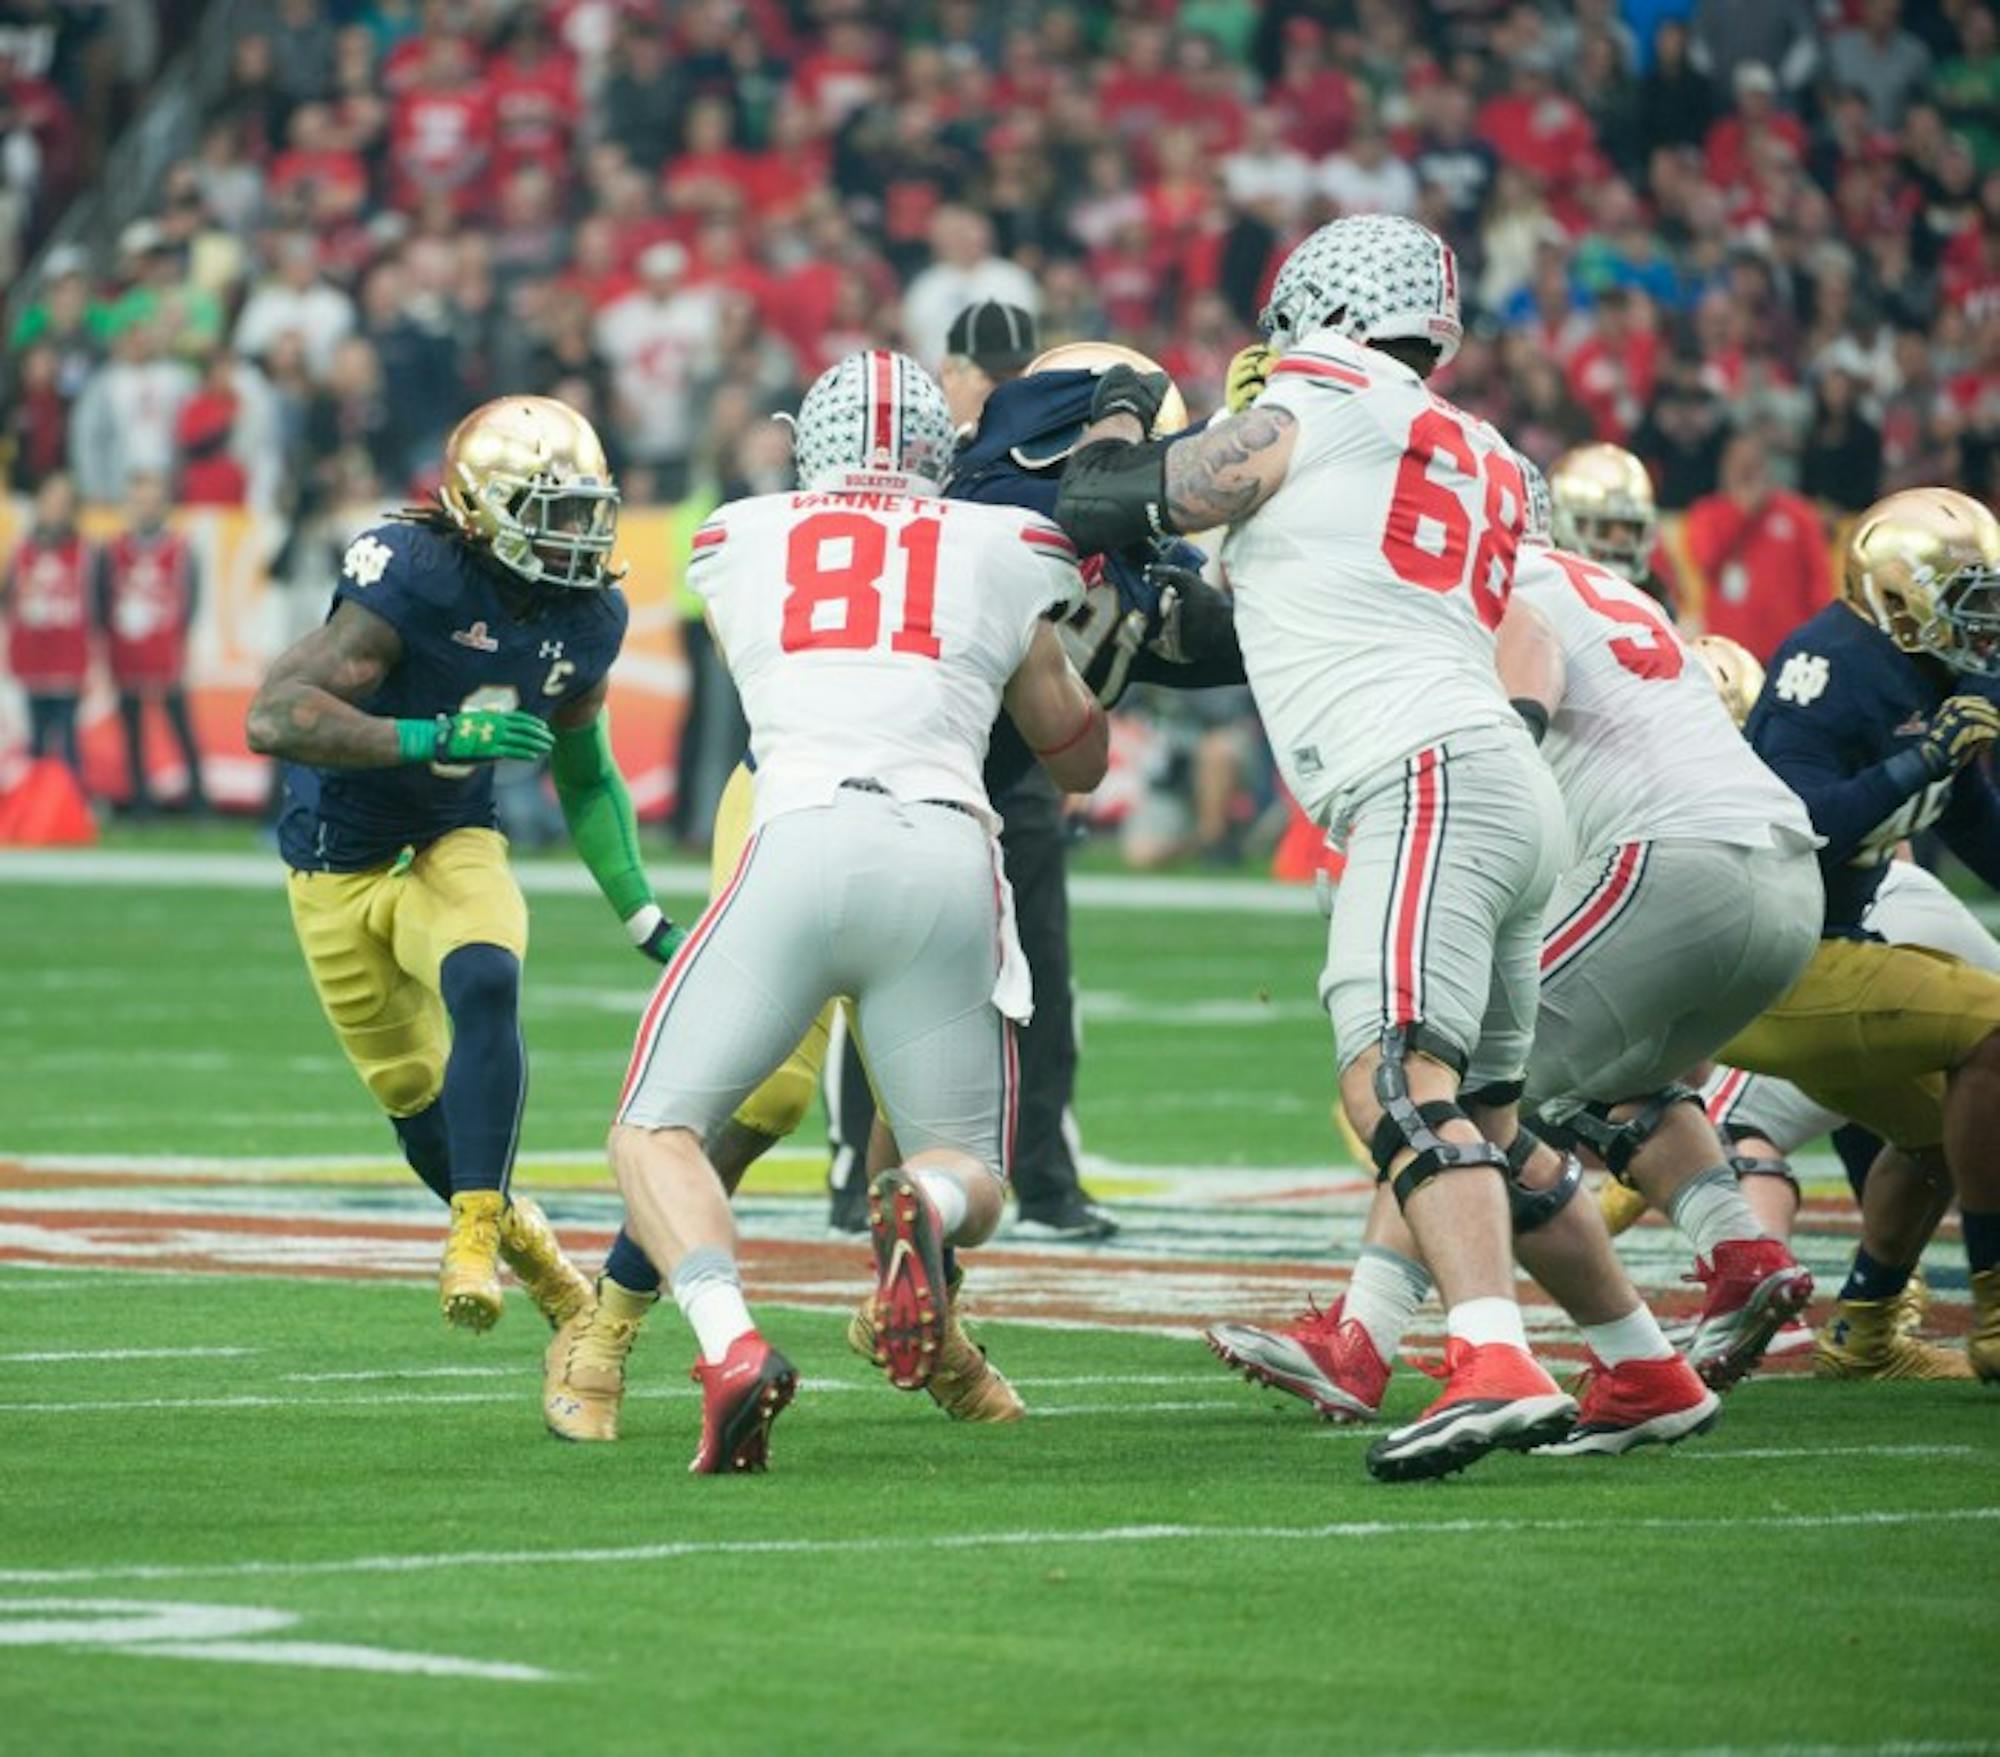 Junior linebacker Jaylon Smith tracks the ballcarrier during Notre Dame’s 44-28 loss to Ohio State in the BattleFrog Fiesta Bowl.